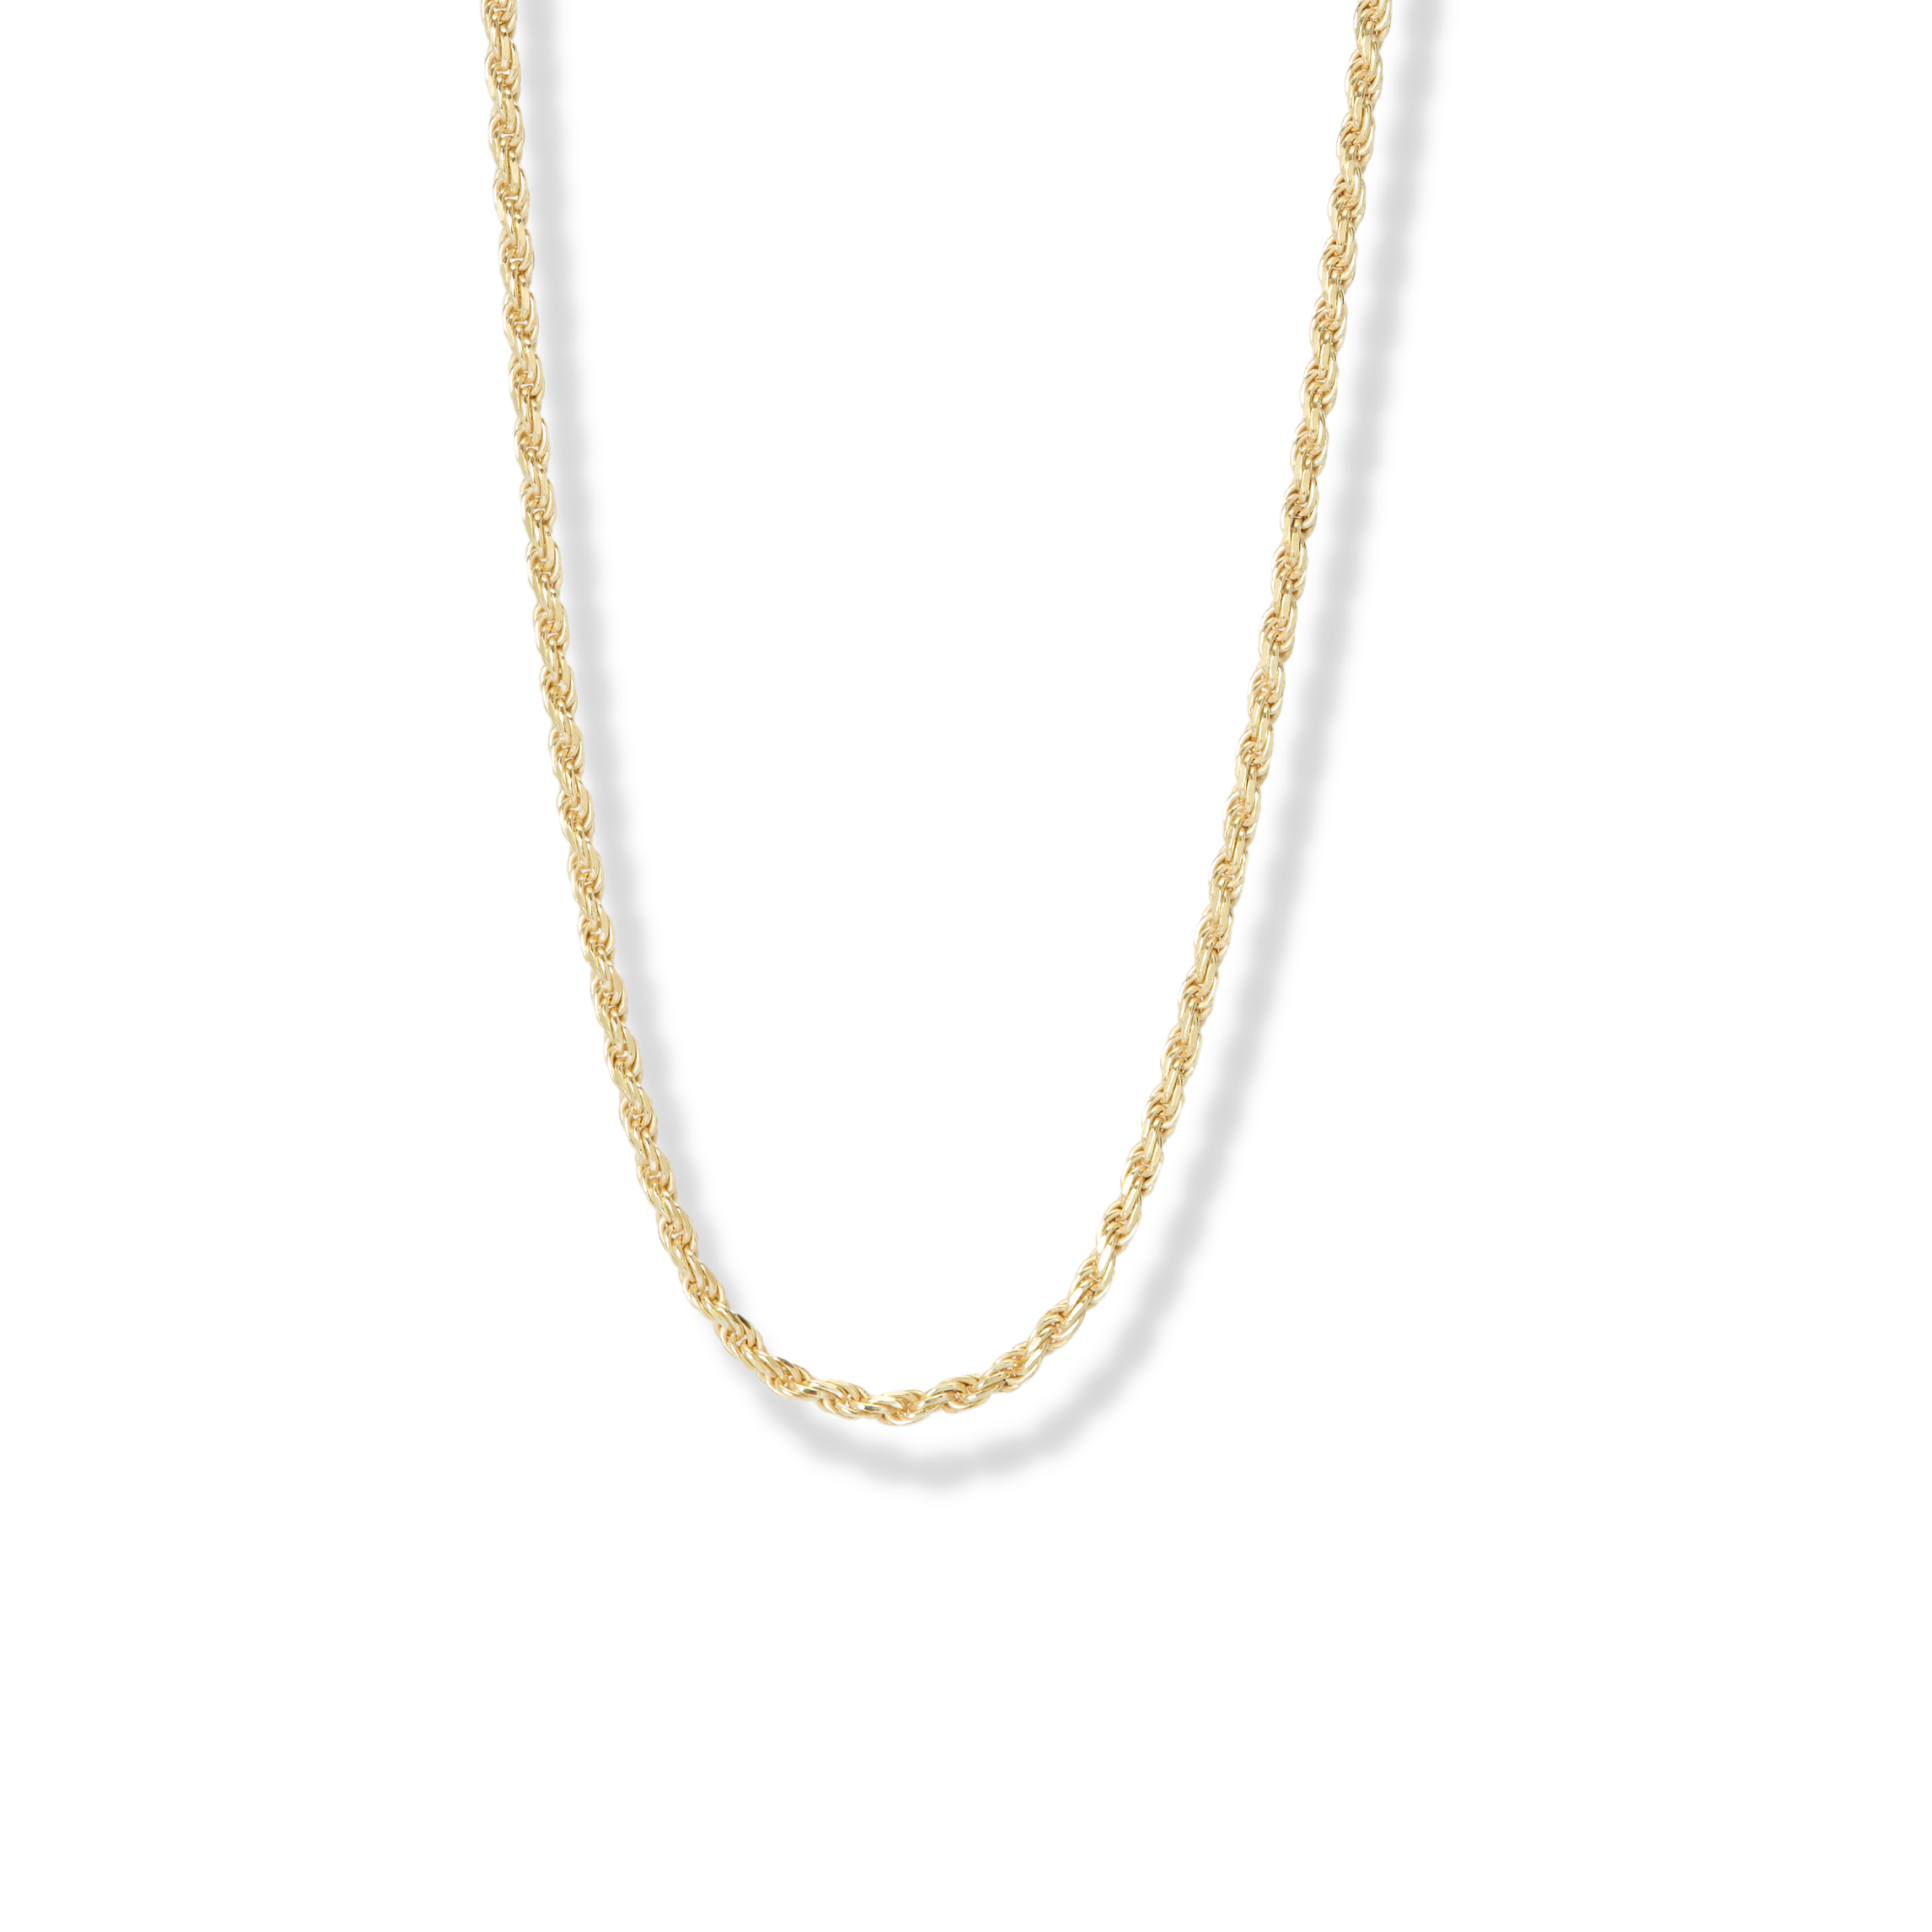 THE THIN ROPE CHAIN NECKLACE